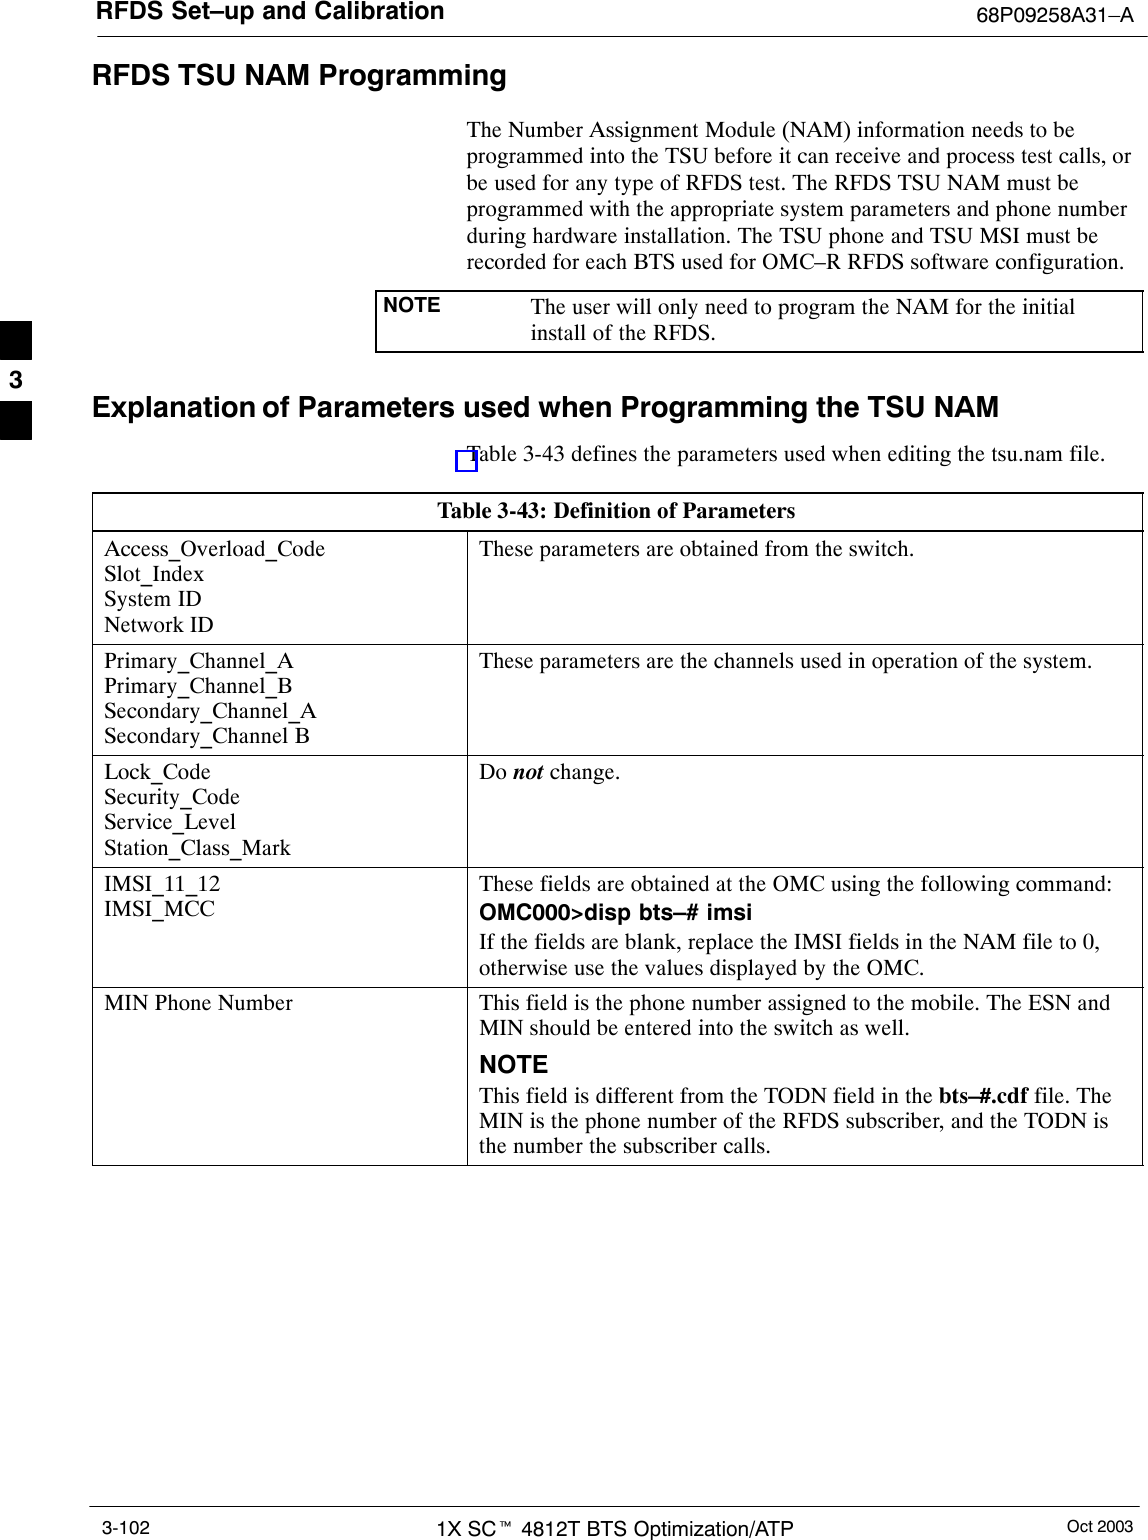 RFDS Set–up and Calibration 68P09258A31–AOct 20031X SCt 4812T BTS Optimization/ATP3-102RFDS TSU NAM ProgrammingThe Number Assignment Module (NAM) information needs to beprogrammed into the TSU before it can receive and process test calls, orbe used for any type of RFDS test. The RFDS TSU NAM must beprogrammed with the appropriate system parameters and phone numberduring hardware installation. The TSU phone and TSU MSI must berecorded for each BTS used for OMC–R RFDS software configuration.NOTE The user will only need to program the NAM for the initialinstall of the RFDS.Explanation of Parameters used when Programming the TSU NAMTable 3-43 defines the parameters used when editing the tsu.nam file.Table 3-43: Definition of ParametersAccess_Overload_CodeSlot_IndexSystem IDNetwork IDThese parameters are obtained from the switch.Primary_Channel_APrimary_Channel_BSecondary_Channel_ASecondary_Channel BThese parameters are the channels used in operation of the system.Lock_CodeSecurity_CodeService_LevelStation_Class_MarkDo not change.IMSI_11_12IMSI_MCCThese fields are obtained at the OMC using the following command:OMC000&gt;disp bts–# imsiIf the fields are blank, replace the IMSI fields in the NAM file to 0,otherwise use the values displayed by the OMC.MIN Phone Number This field is the phone number assigned to the mobile. The ESN andMIN should be entered into the switch as well.NOTEThis field is different from the TODN field in the bts–#.cdf file. TheMIN is the phone number of the RFDS subscriber, and the TODN isthe number the subscriber calls.3